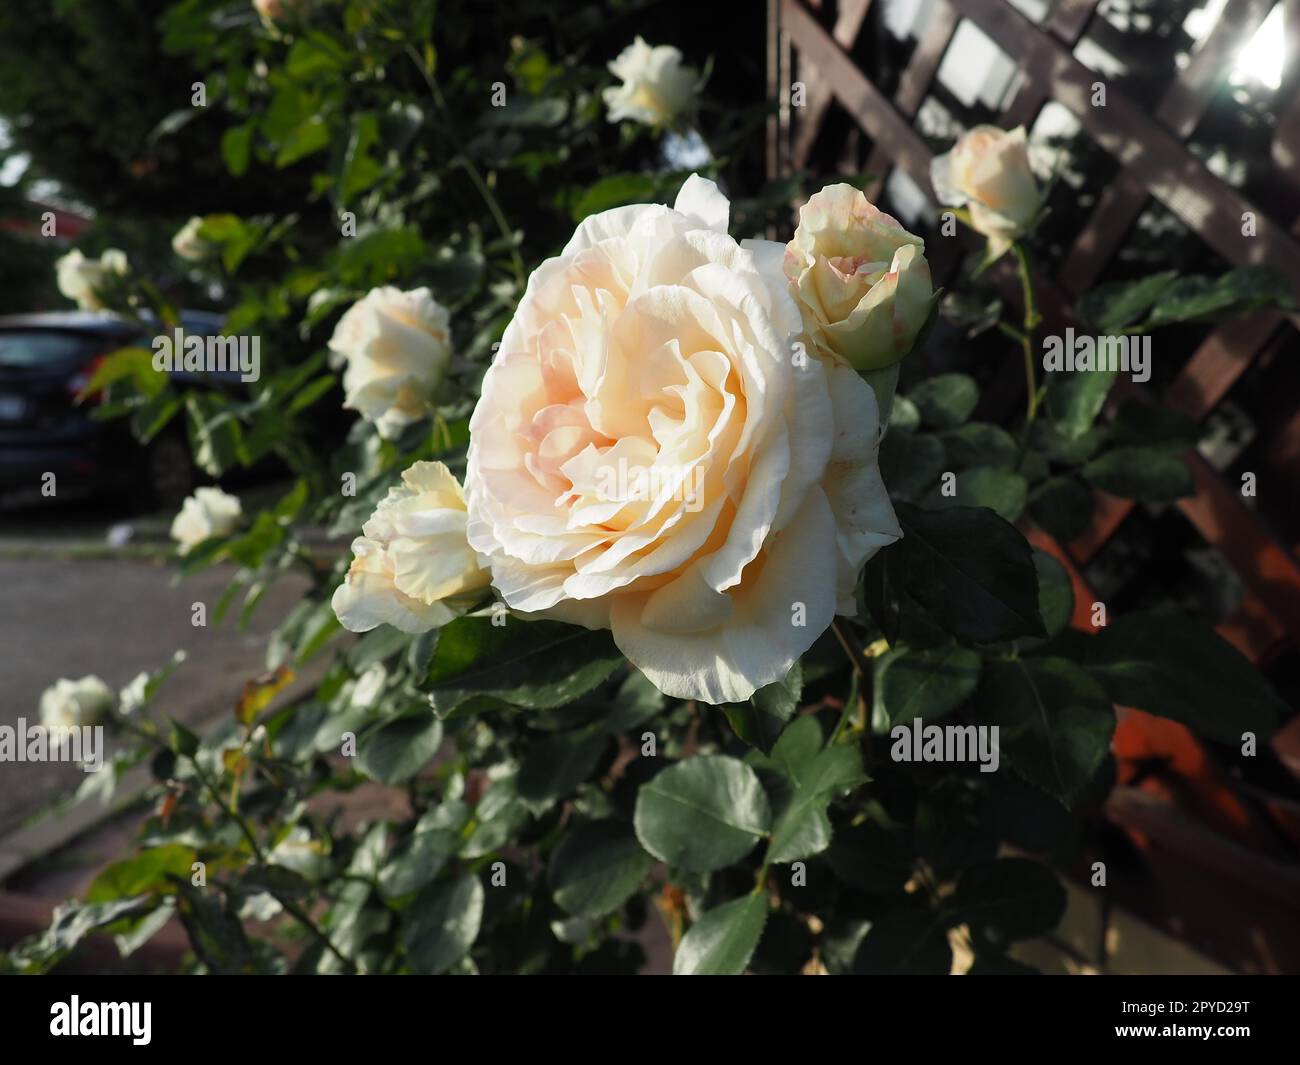 beautiful large double roses in the garden against the background of green leaves and a wooden lattice. Decoration of the garden, garden and lawn. Floriculture, horticulture, botany and agriculture Stock Photo